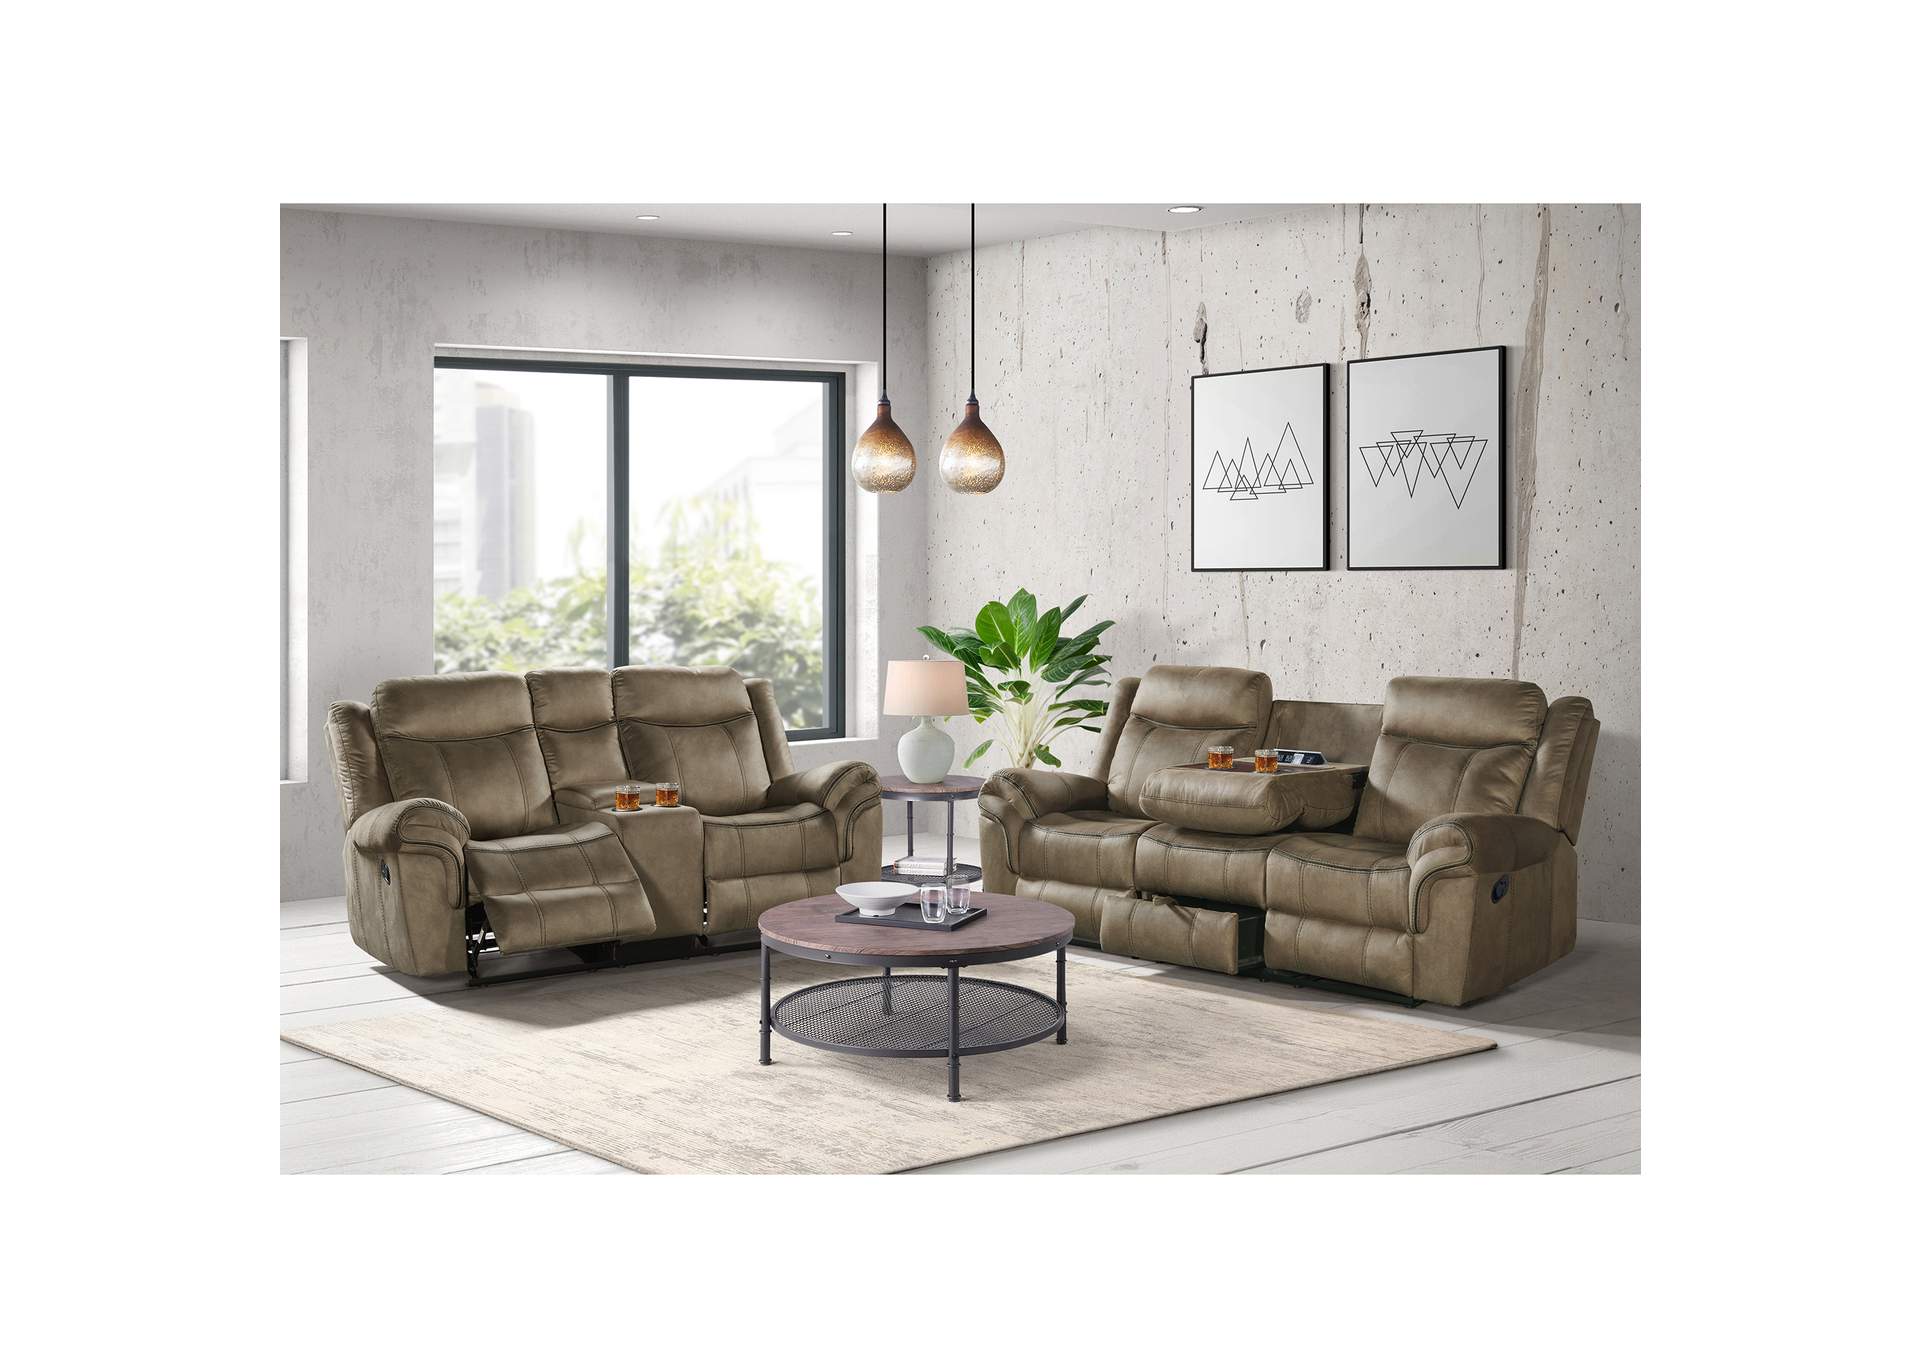 Sorrento Motion Loveseat With Console In T101 Brown,Elements